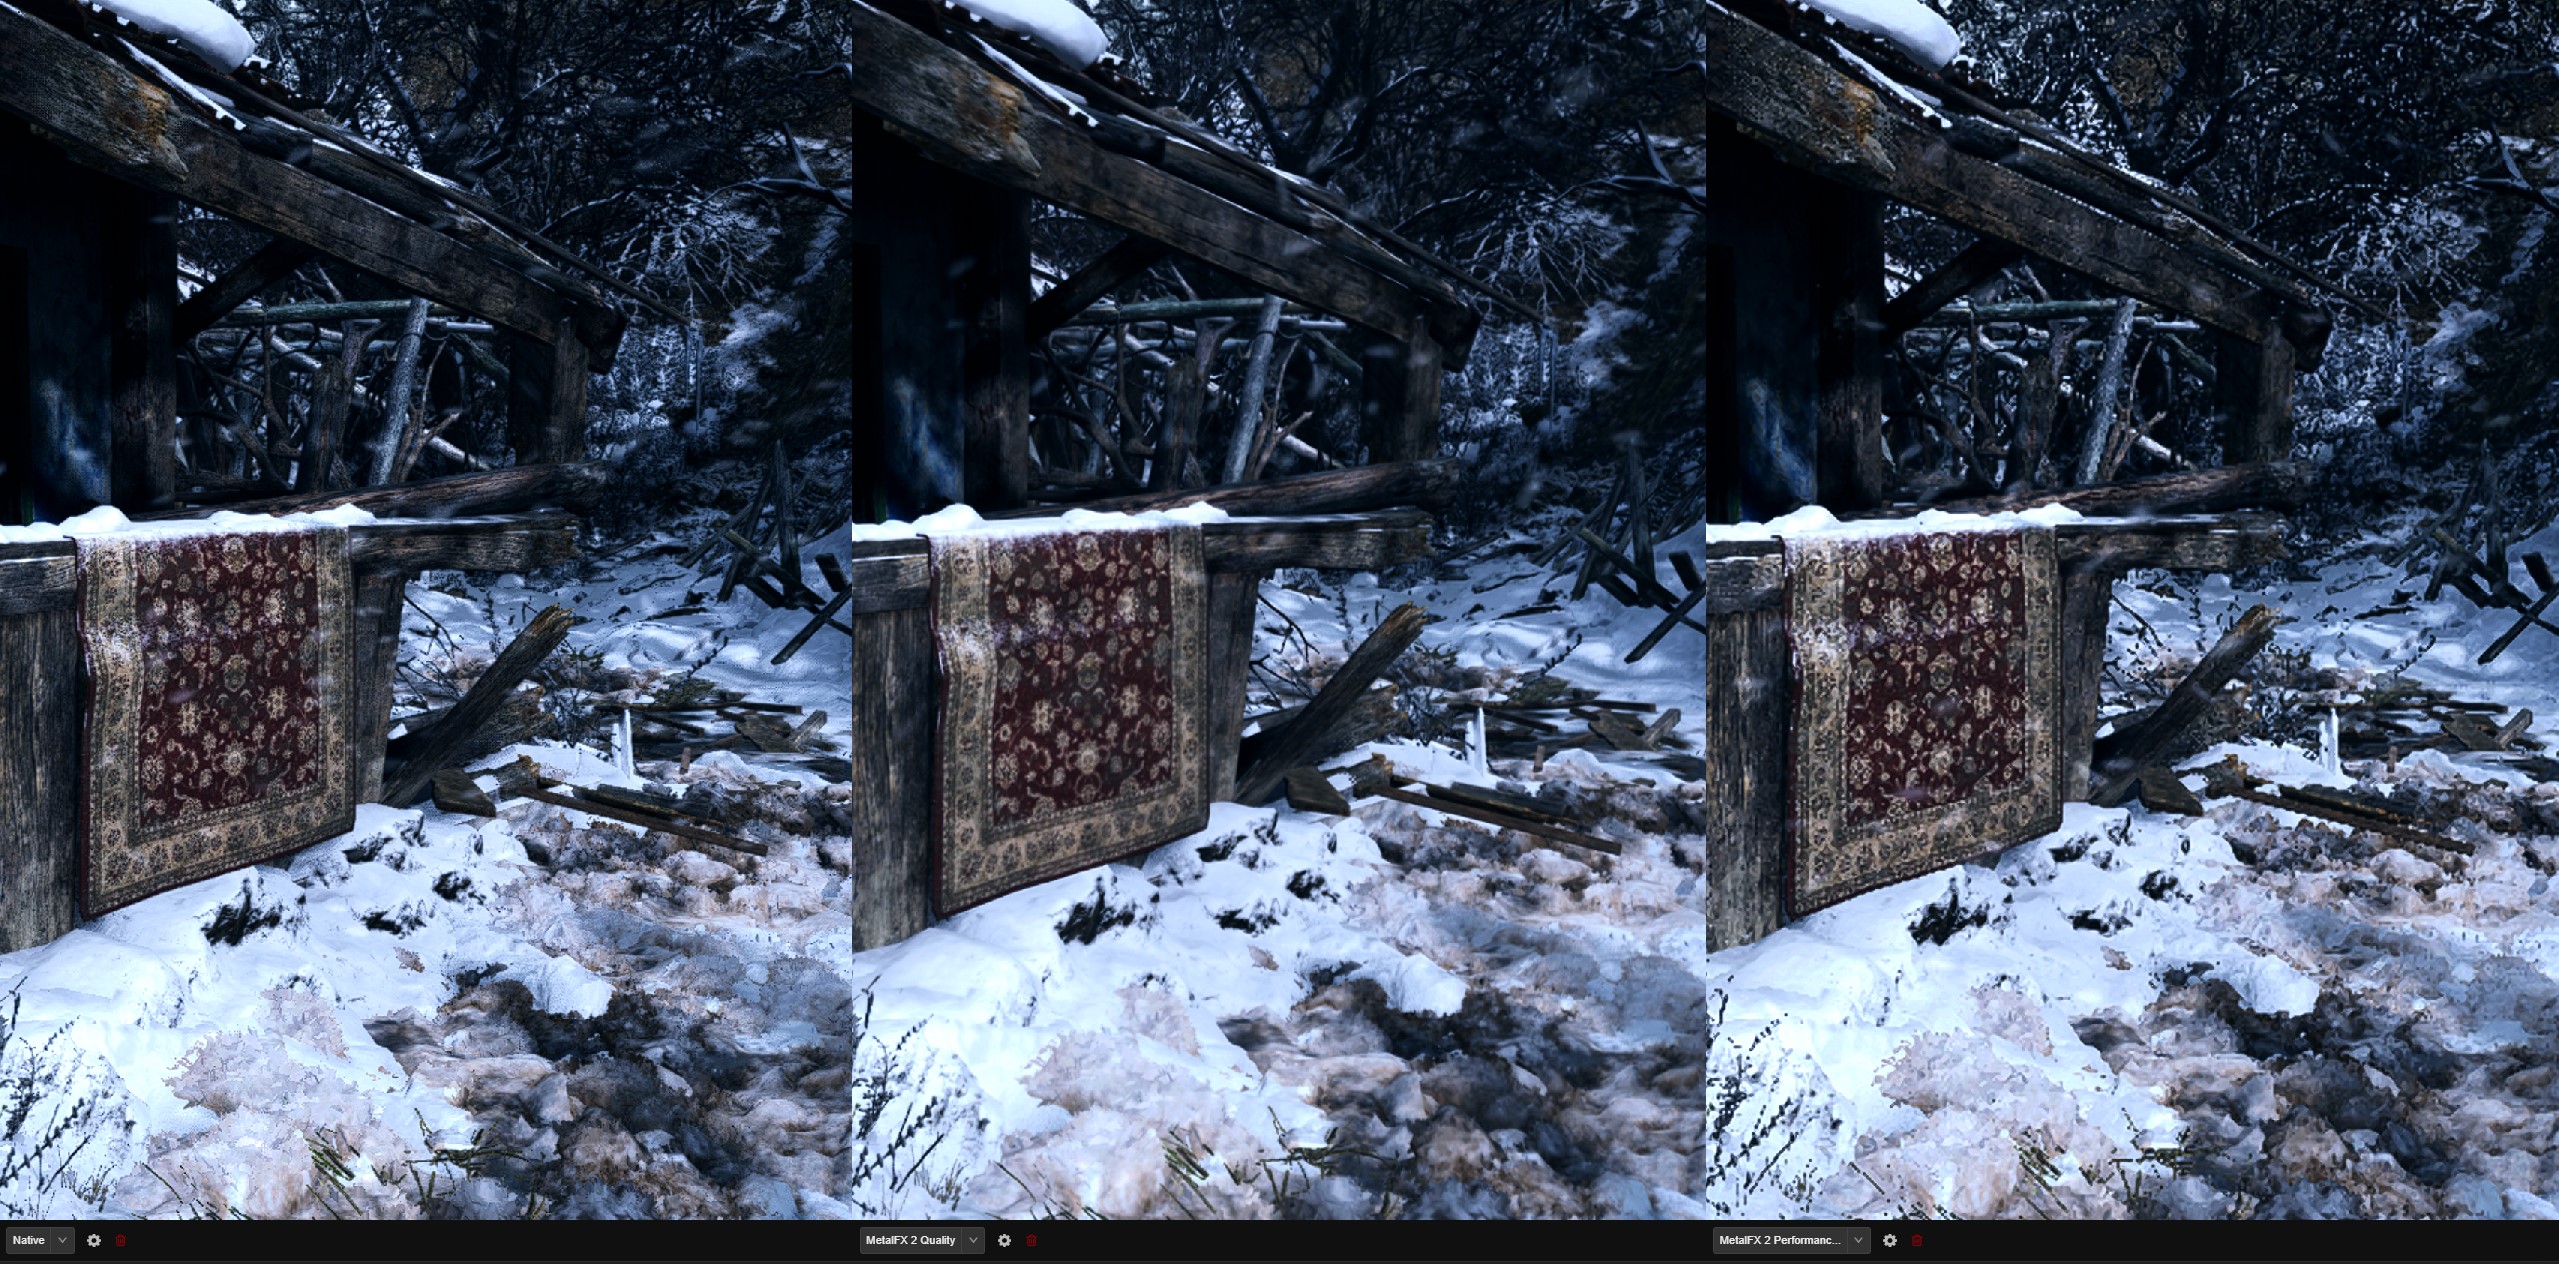 Three side-by-side photos comparing MetalFX upscaling modes.